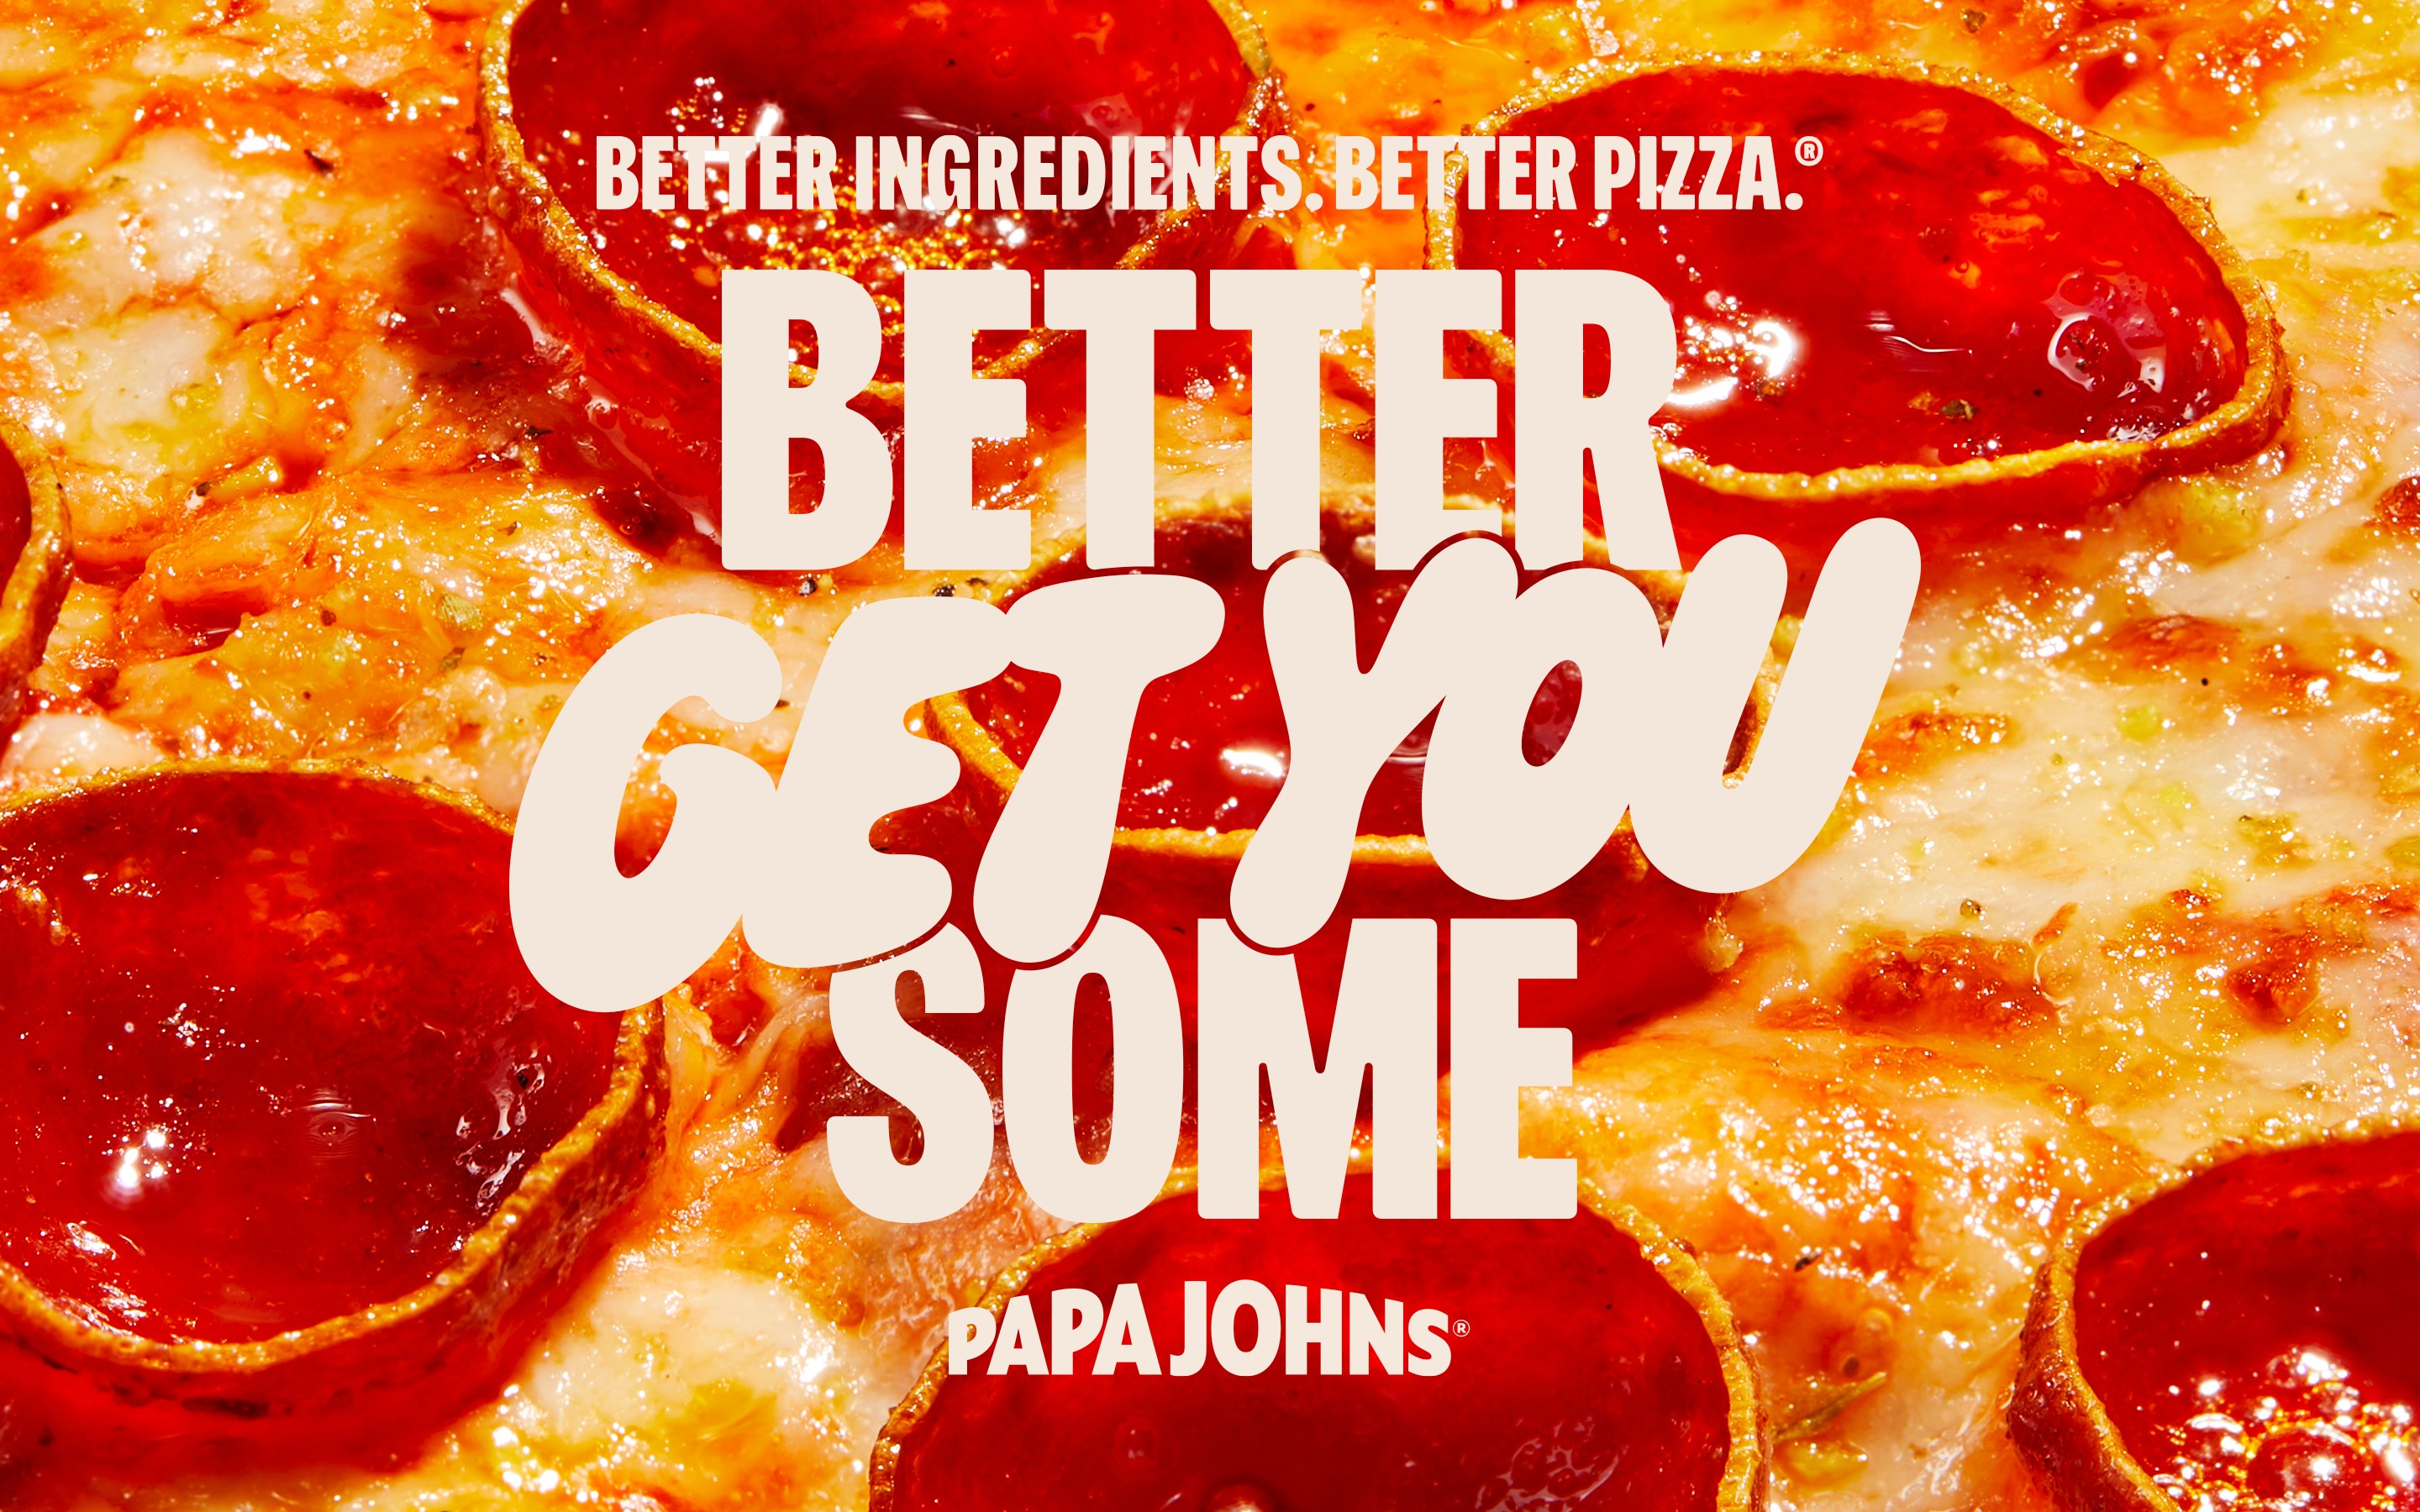 Better Ingredients. Better Pizza. Better Get You Some